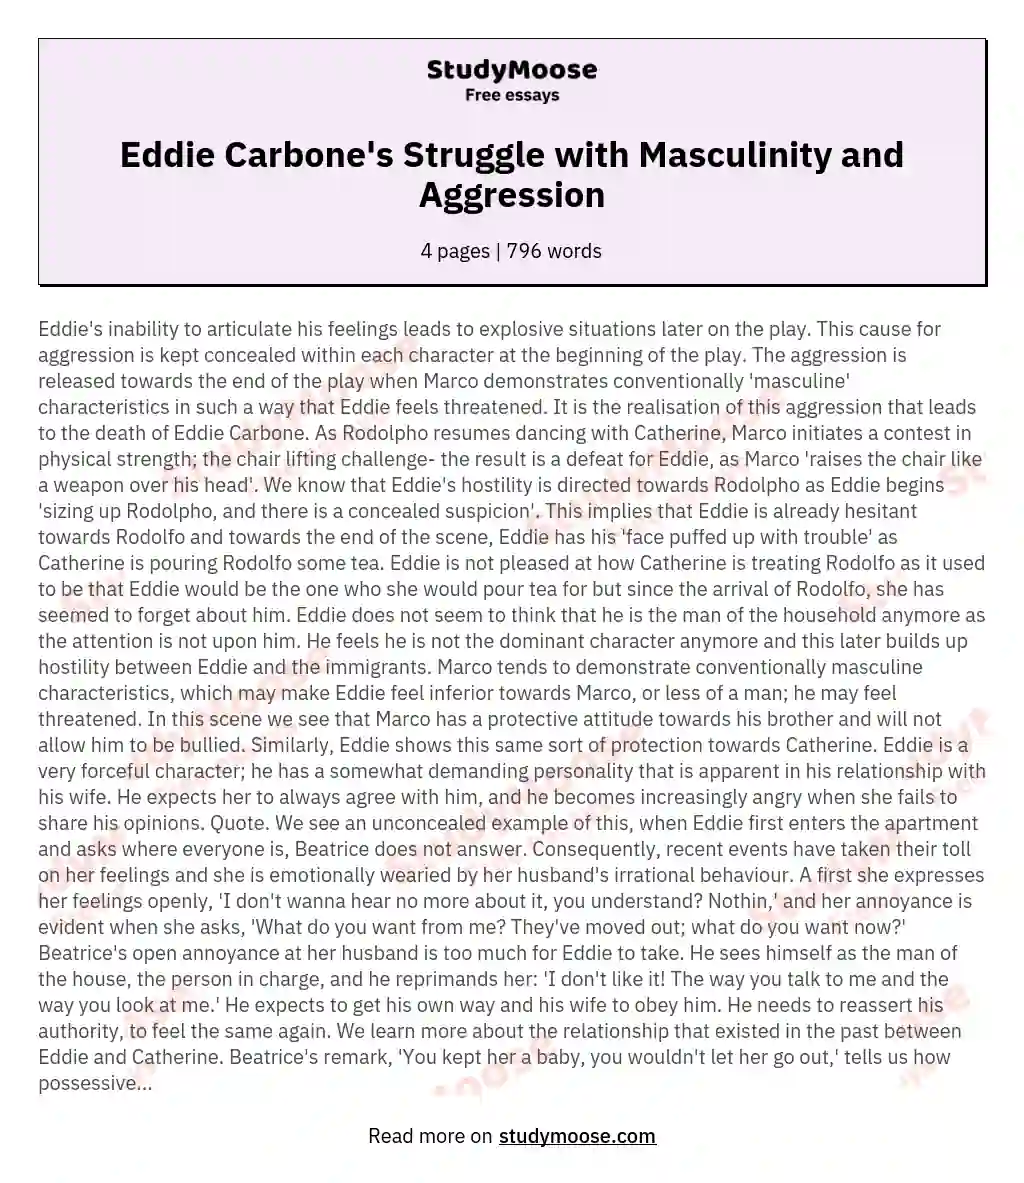 Eddie Carbone's Struggle with Masculinity and Aggression essay